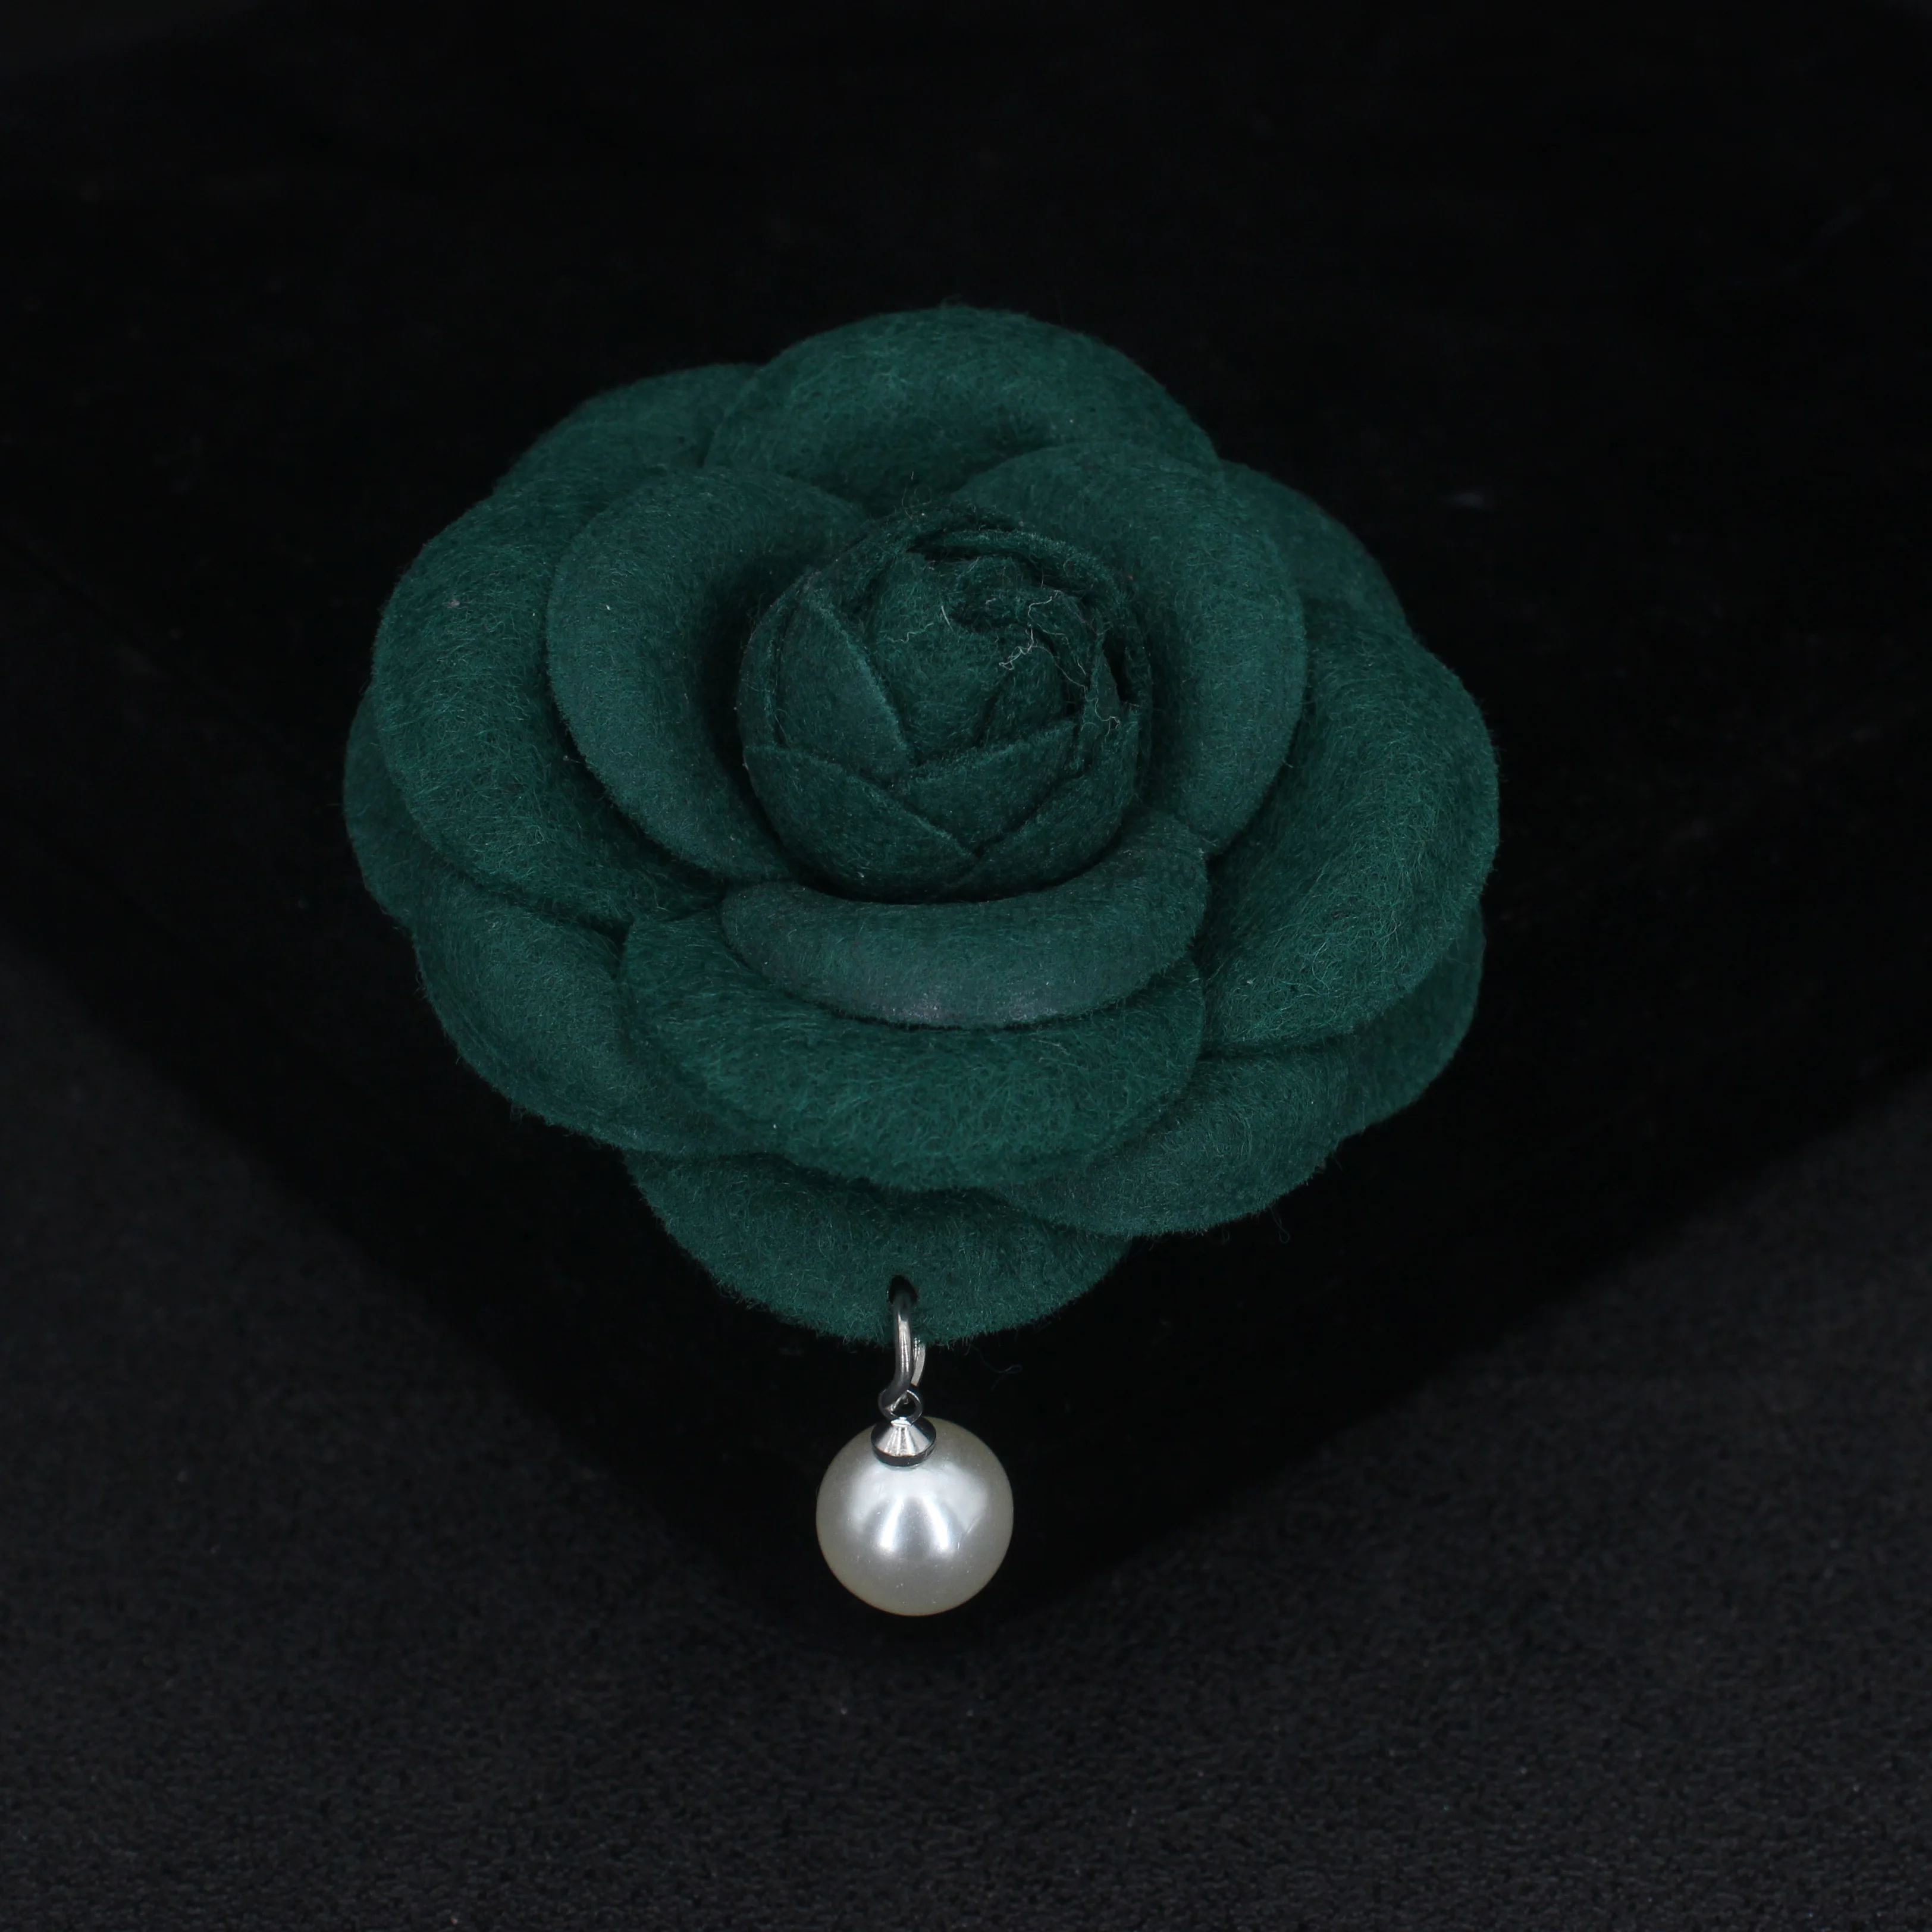 White Jewelry Pearl Broaches For Women Large Flower Brooch For